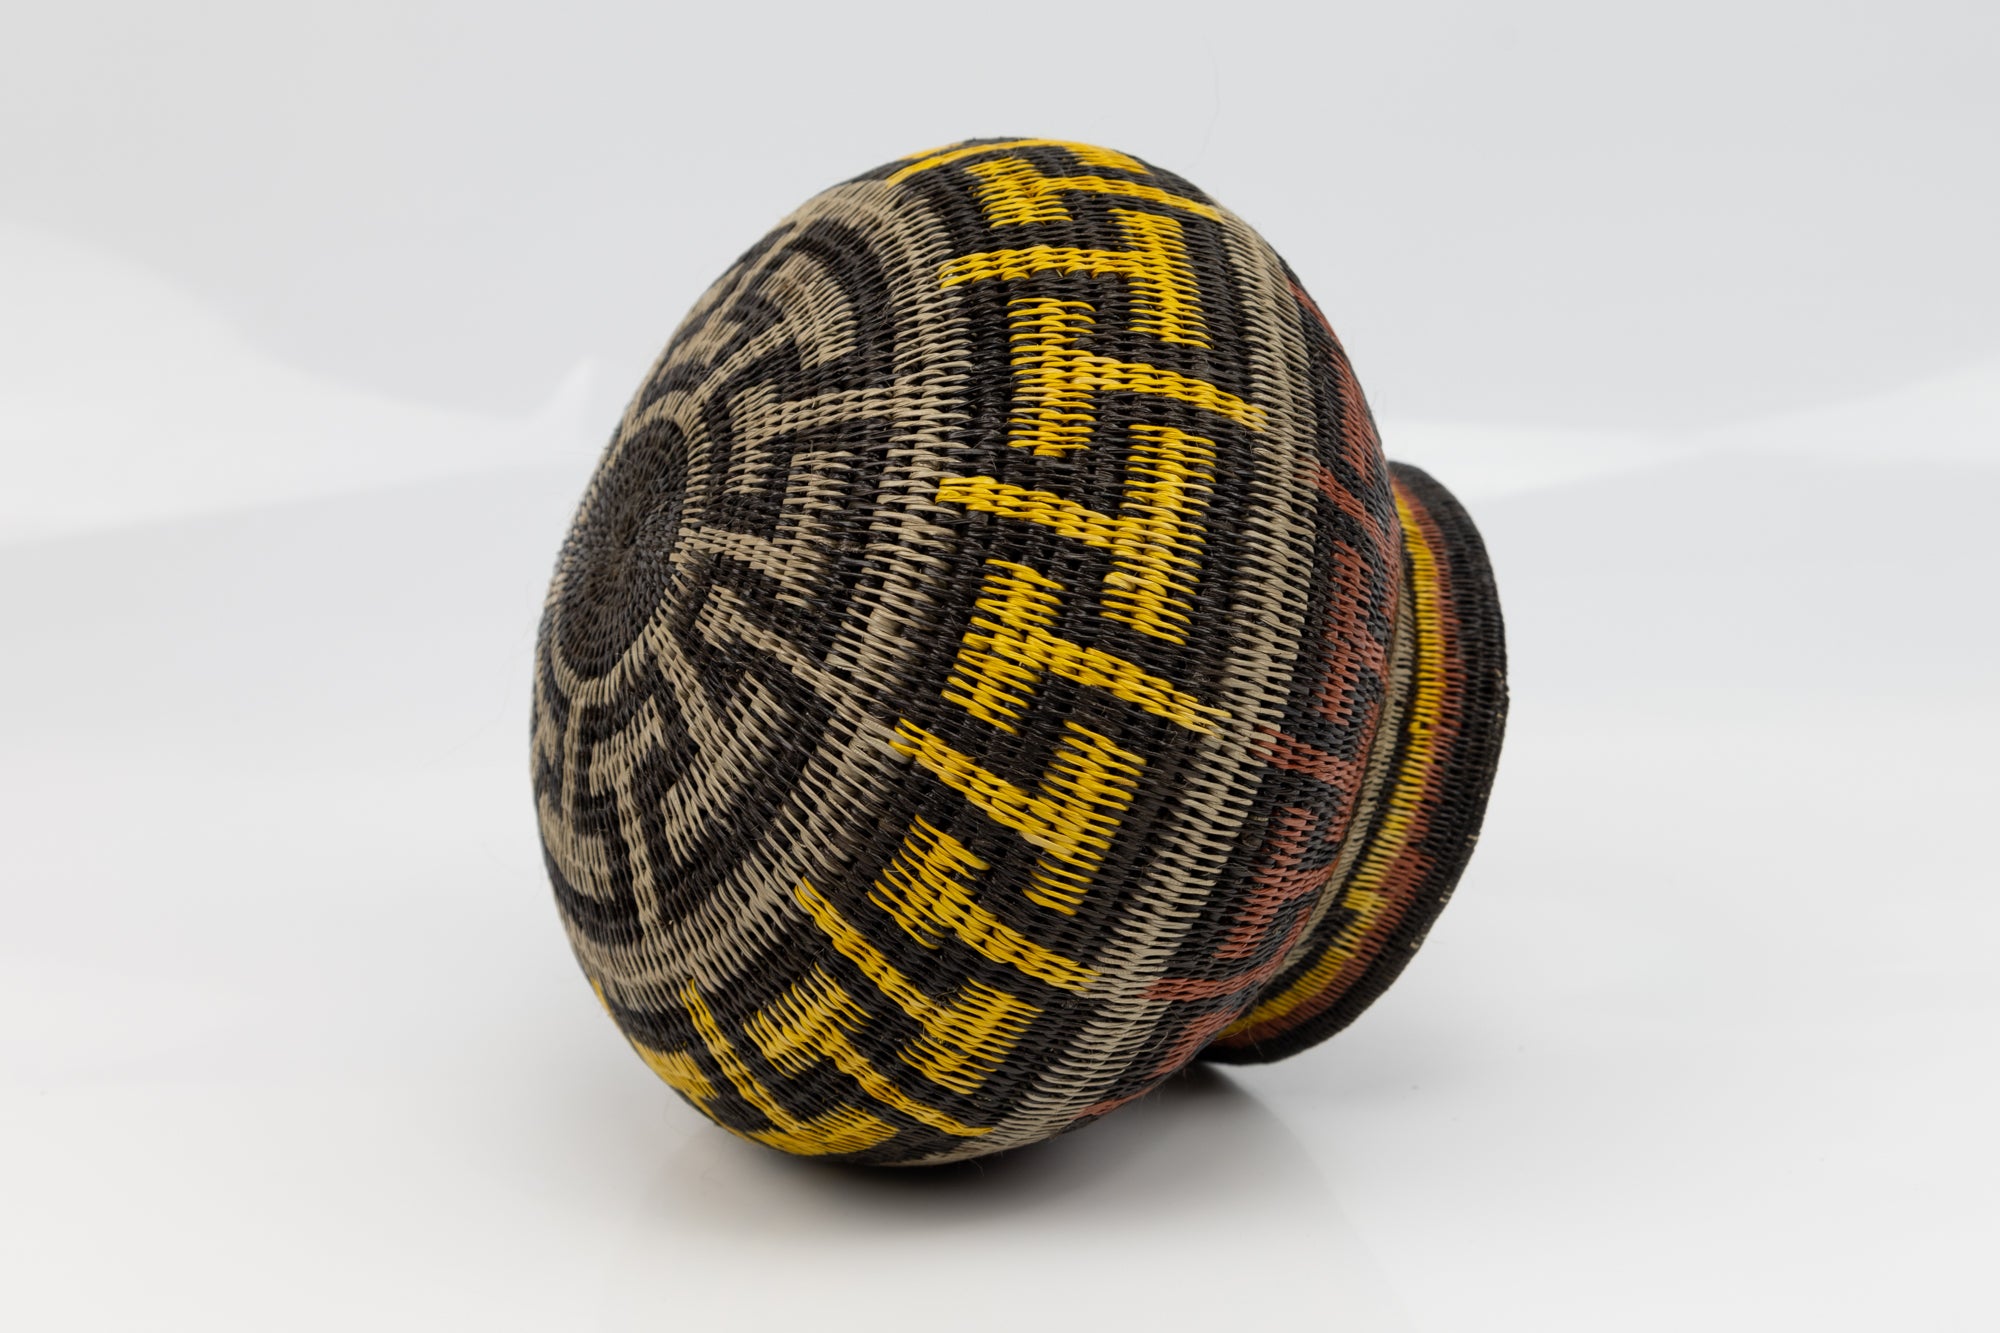 Black Brown and Gold Woven Basket